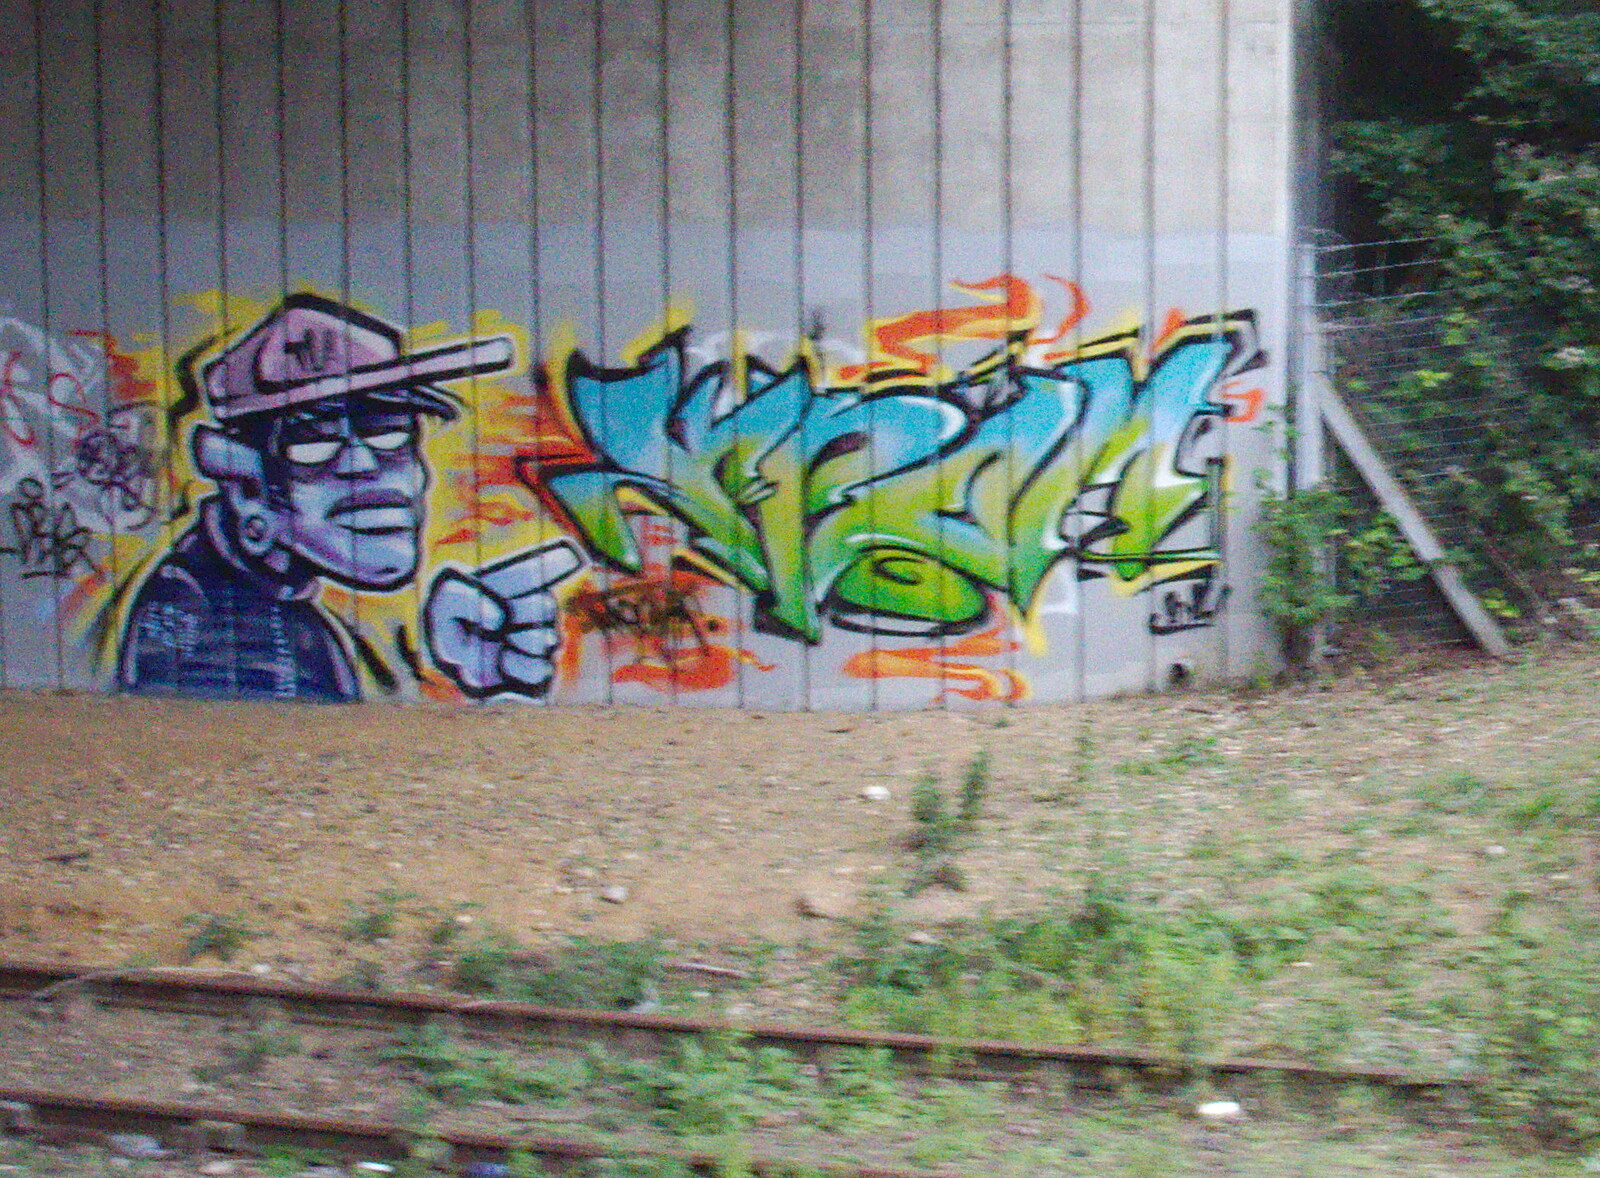 Some groovy graffiti under a road bridge from Railway Hell: A Pantograph Story, Chelmsford, Essex - 17th June 2014